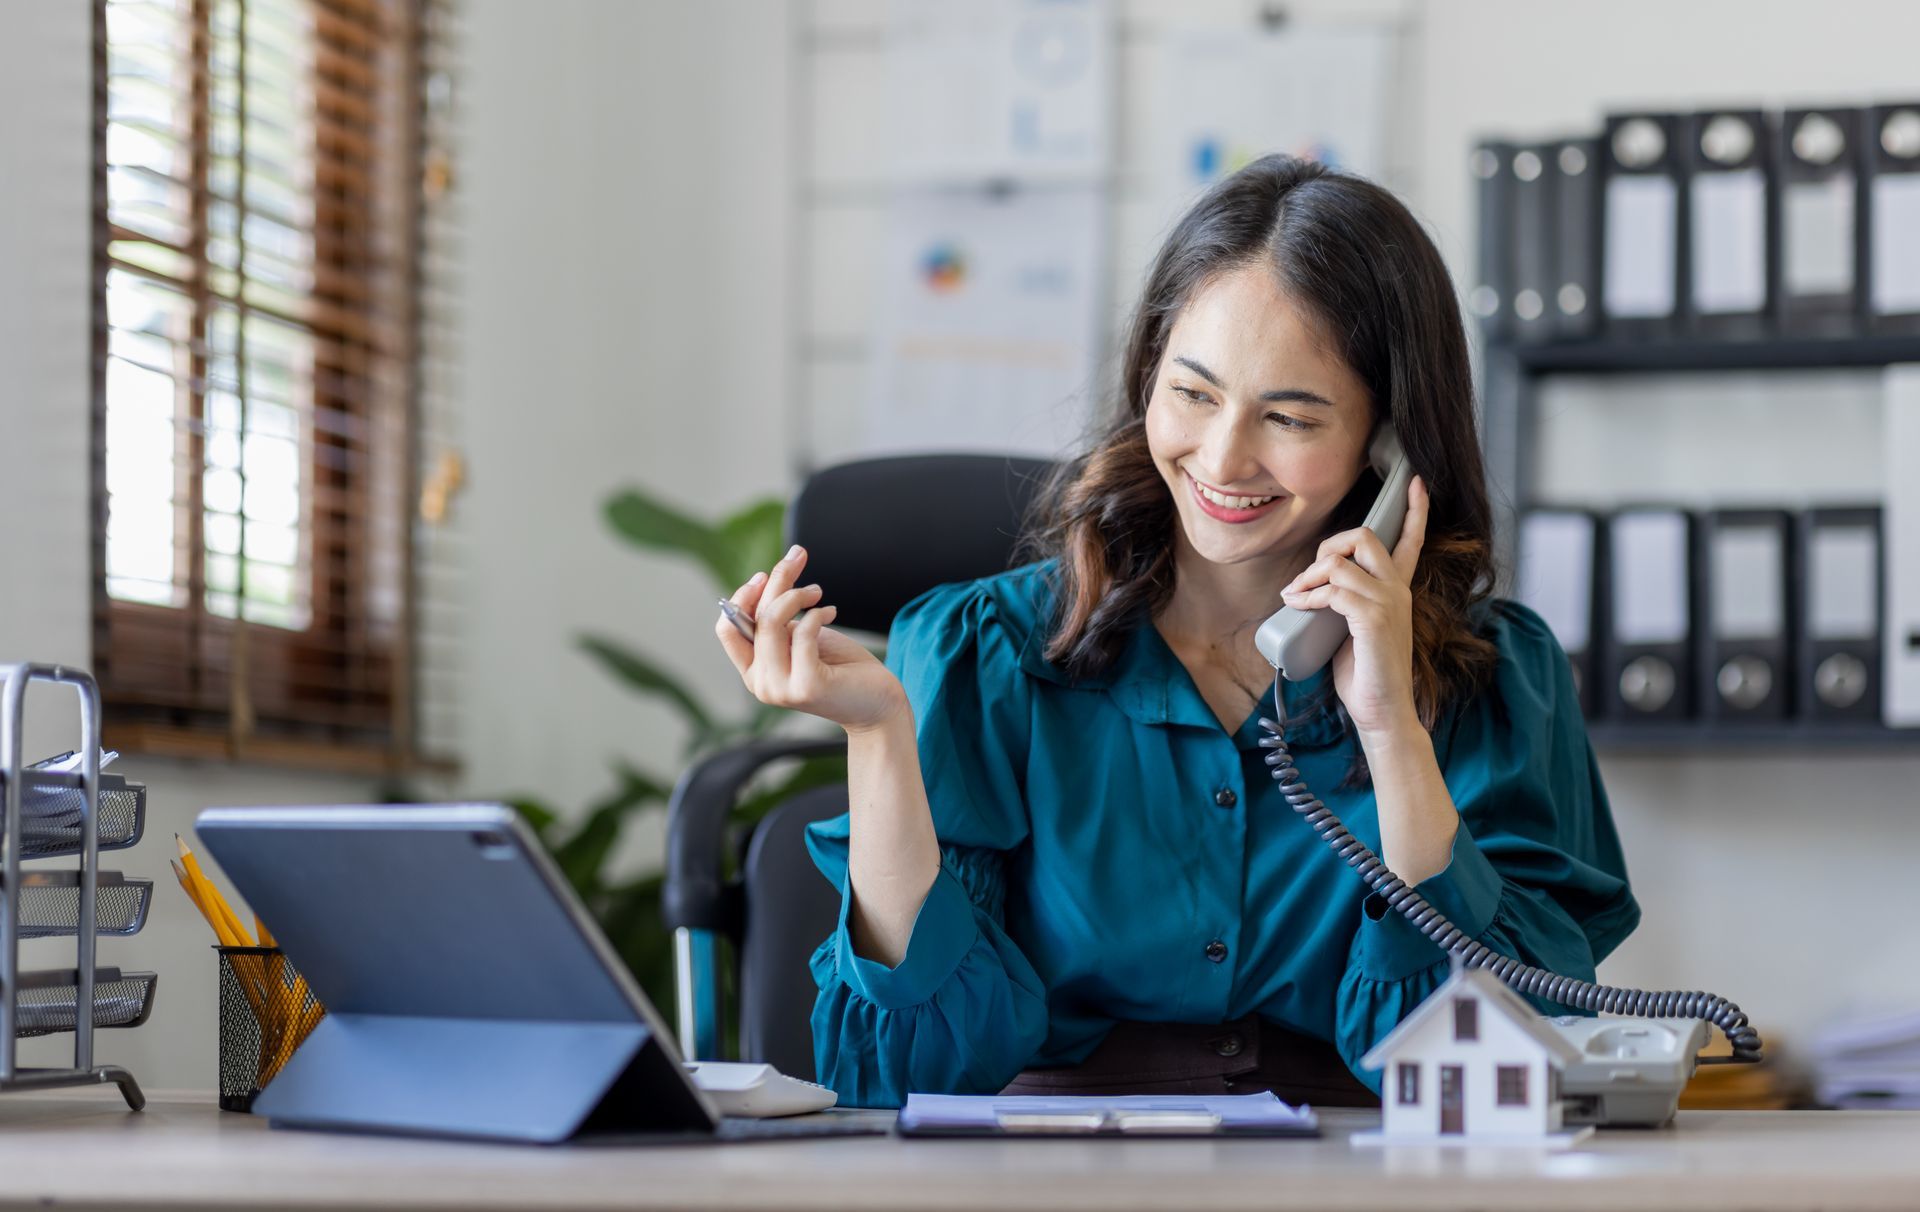 happy woman smiling on phone at desk